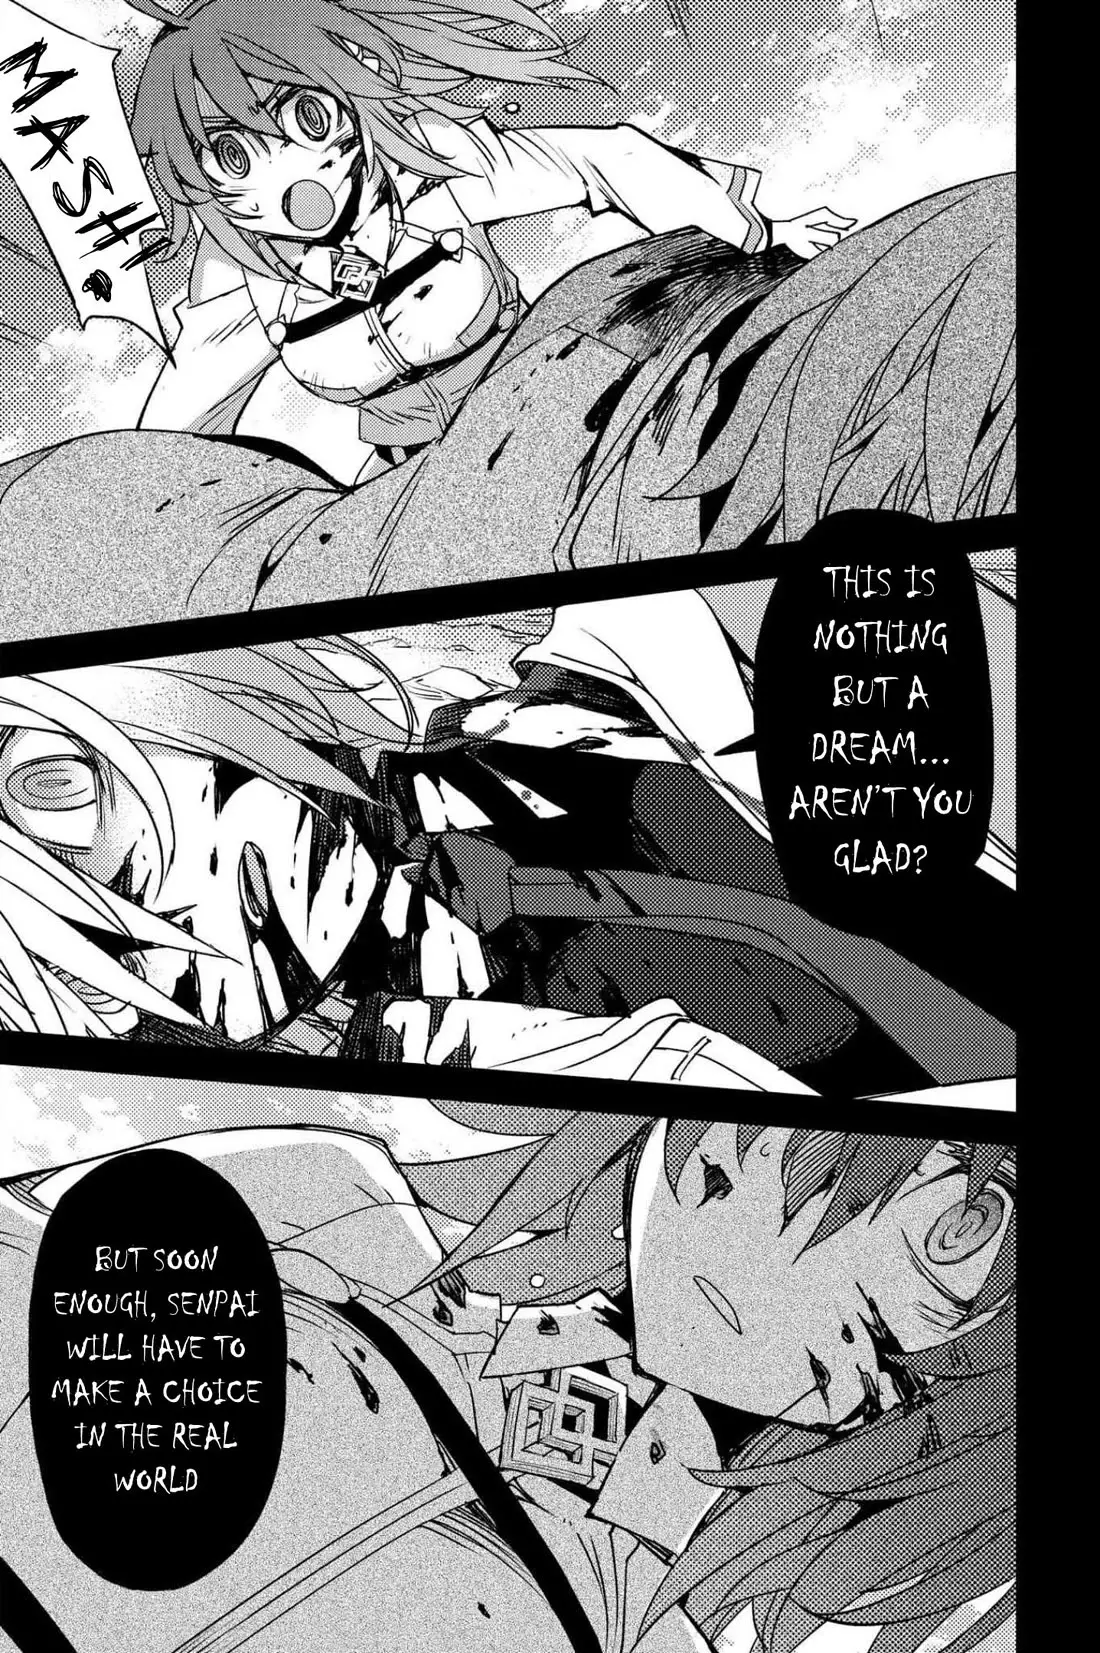 Fate/grand Order: Epic Of Remnant - Subspecies Singularity Iv: Taboo Advent Salem: Salem Of Heresy - 27 page 3-f656af4c